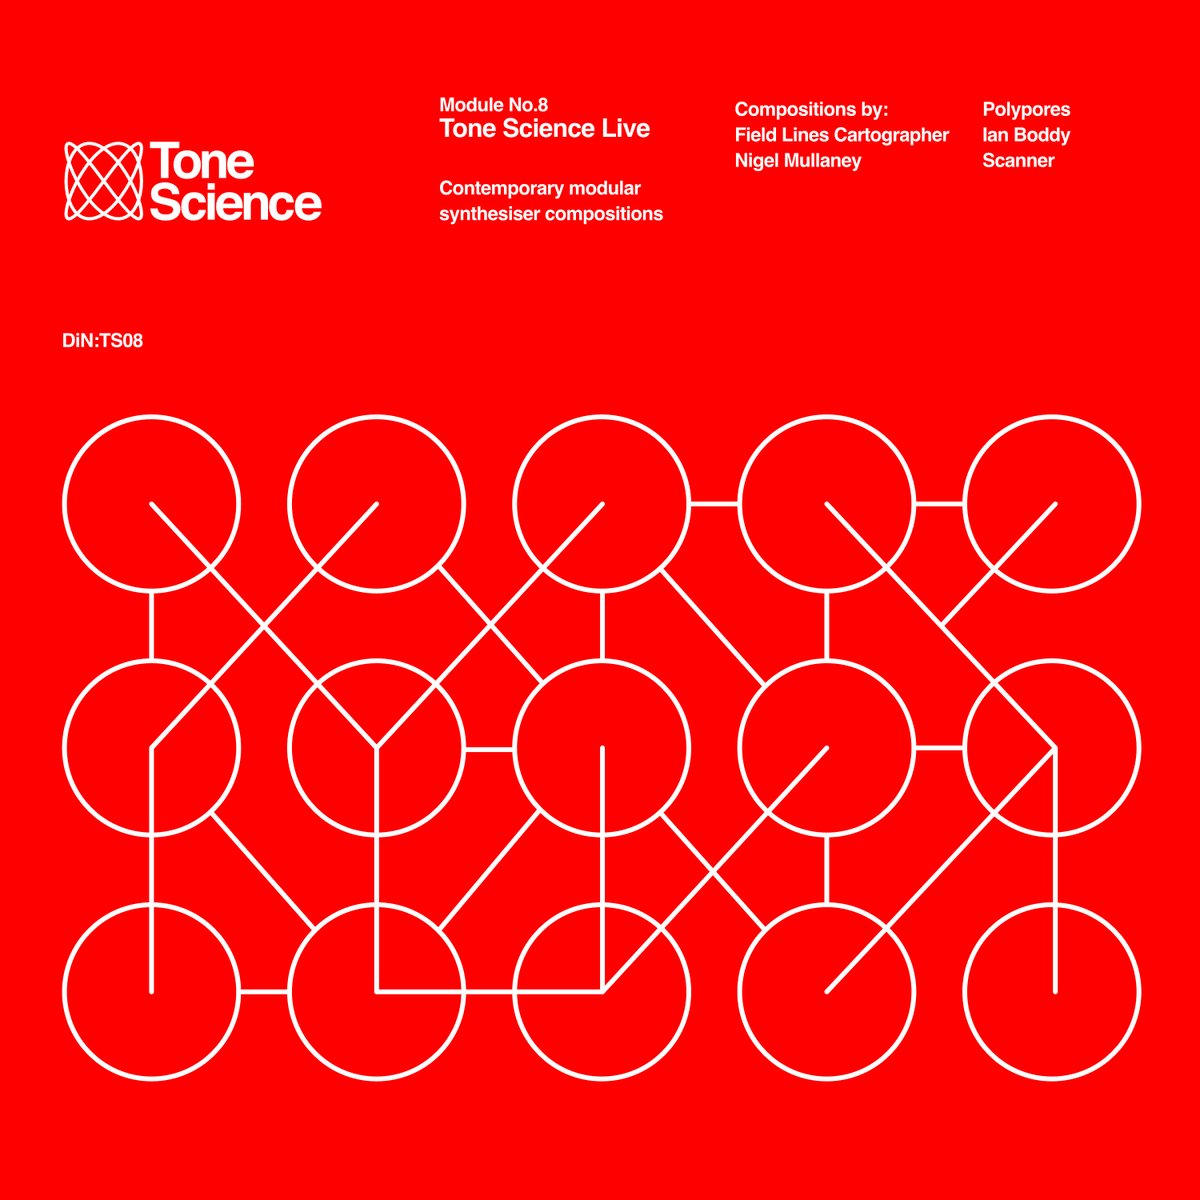 News Flash - to be released on 6th October will be Tone Science Module No.8 Tone Science Live. A double CD of the entire Tone Science Live concert held at the @capstonetheatre on April 22nd with sets by @robinrimbaud, @stephenjbuckley, @FLCartographer, Nigel Mullaney & myself.